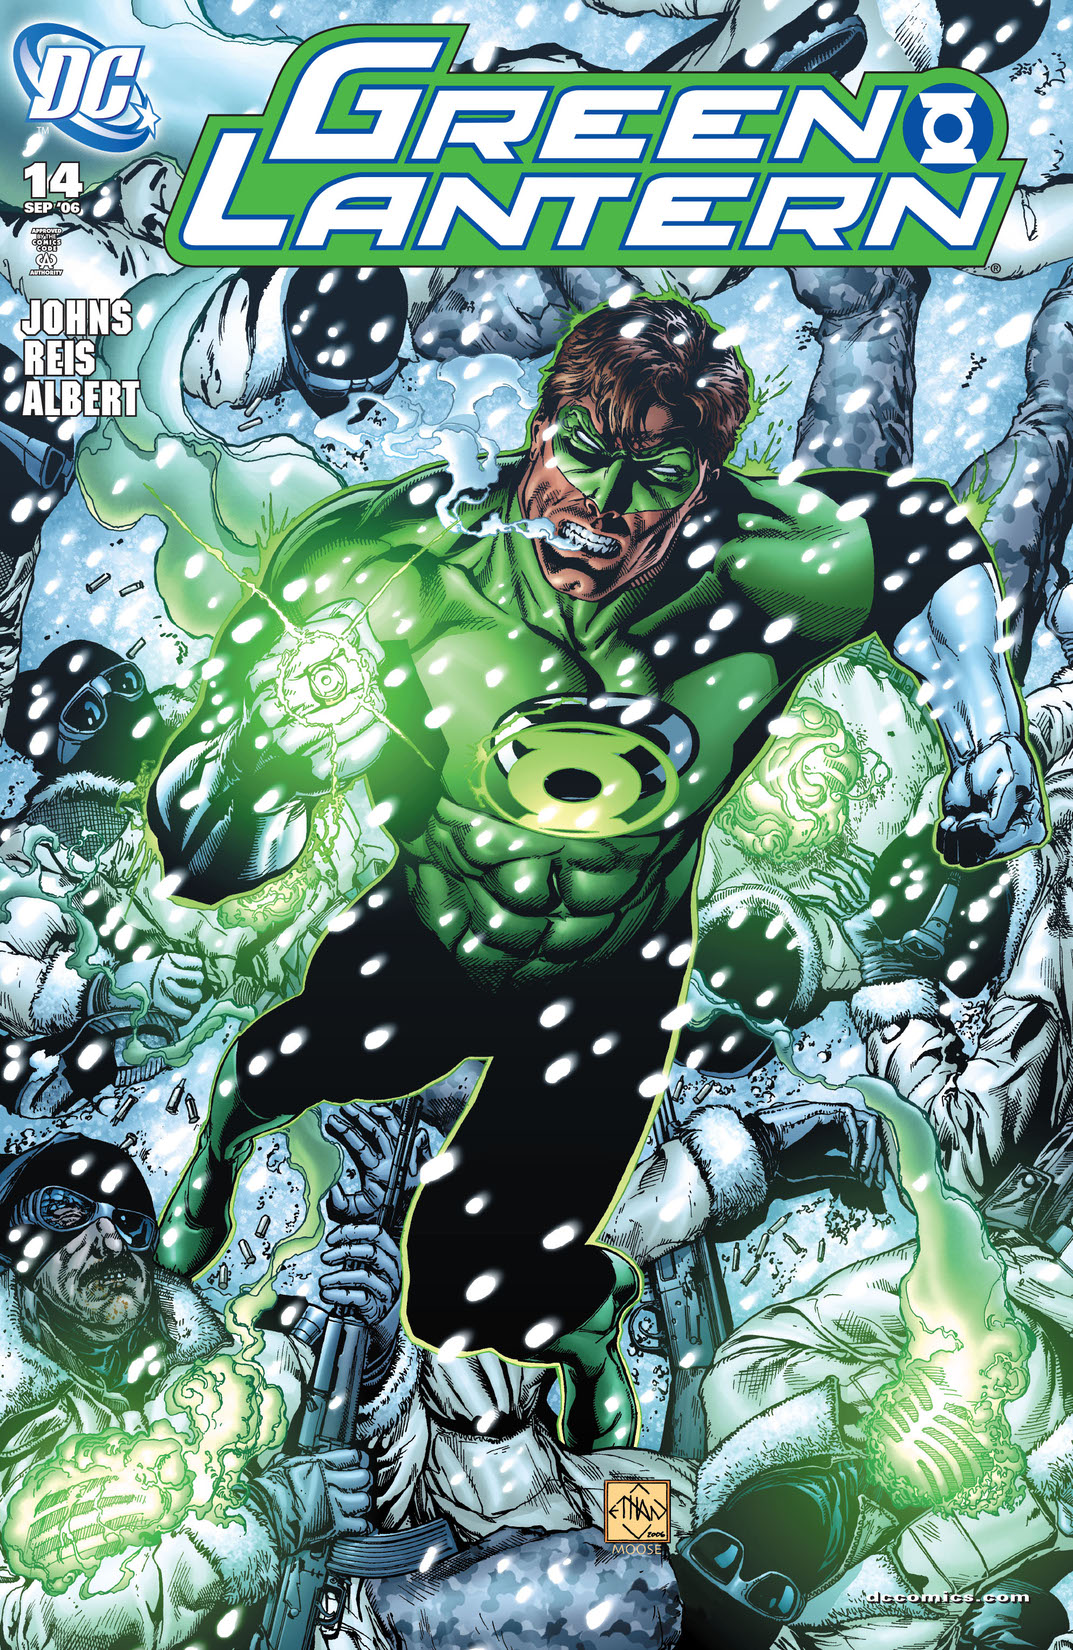 Green Lantern (2005-) #14 preview images